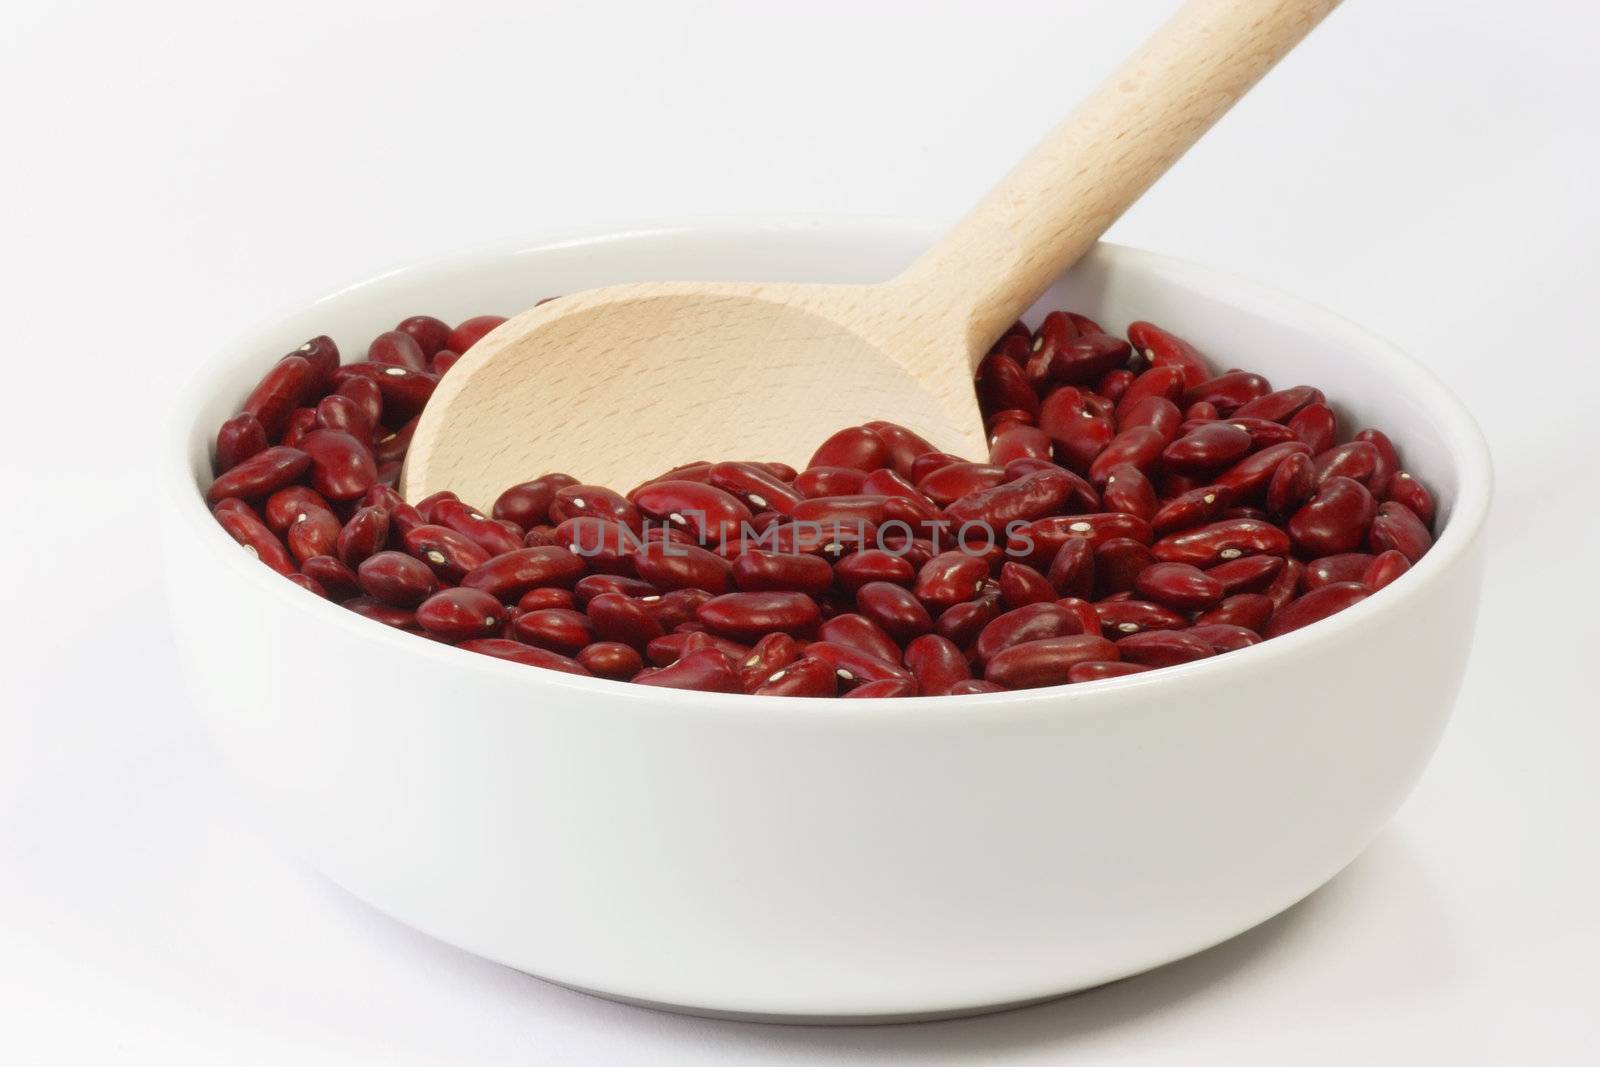 Red Kidney Beans in a white bowl on bright Background